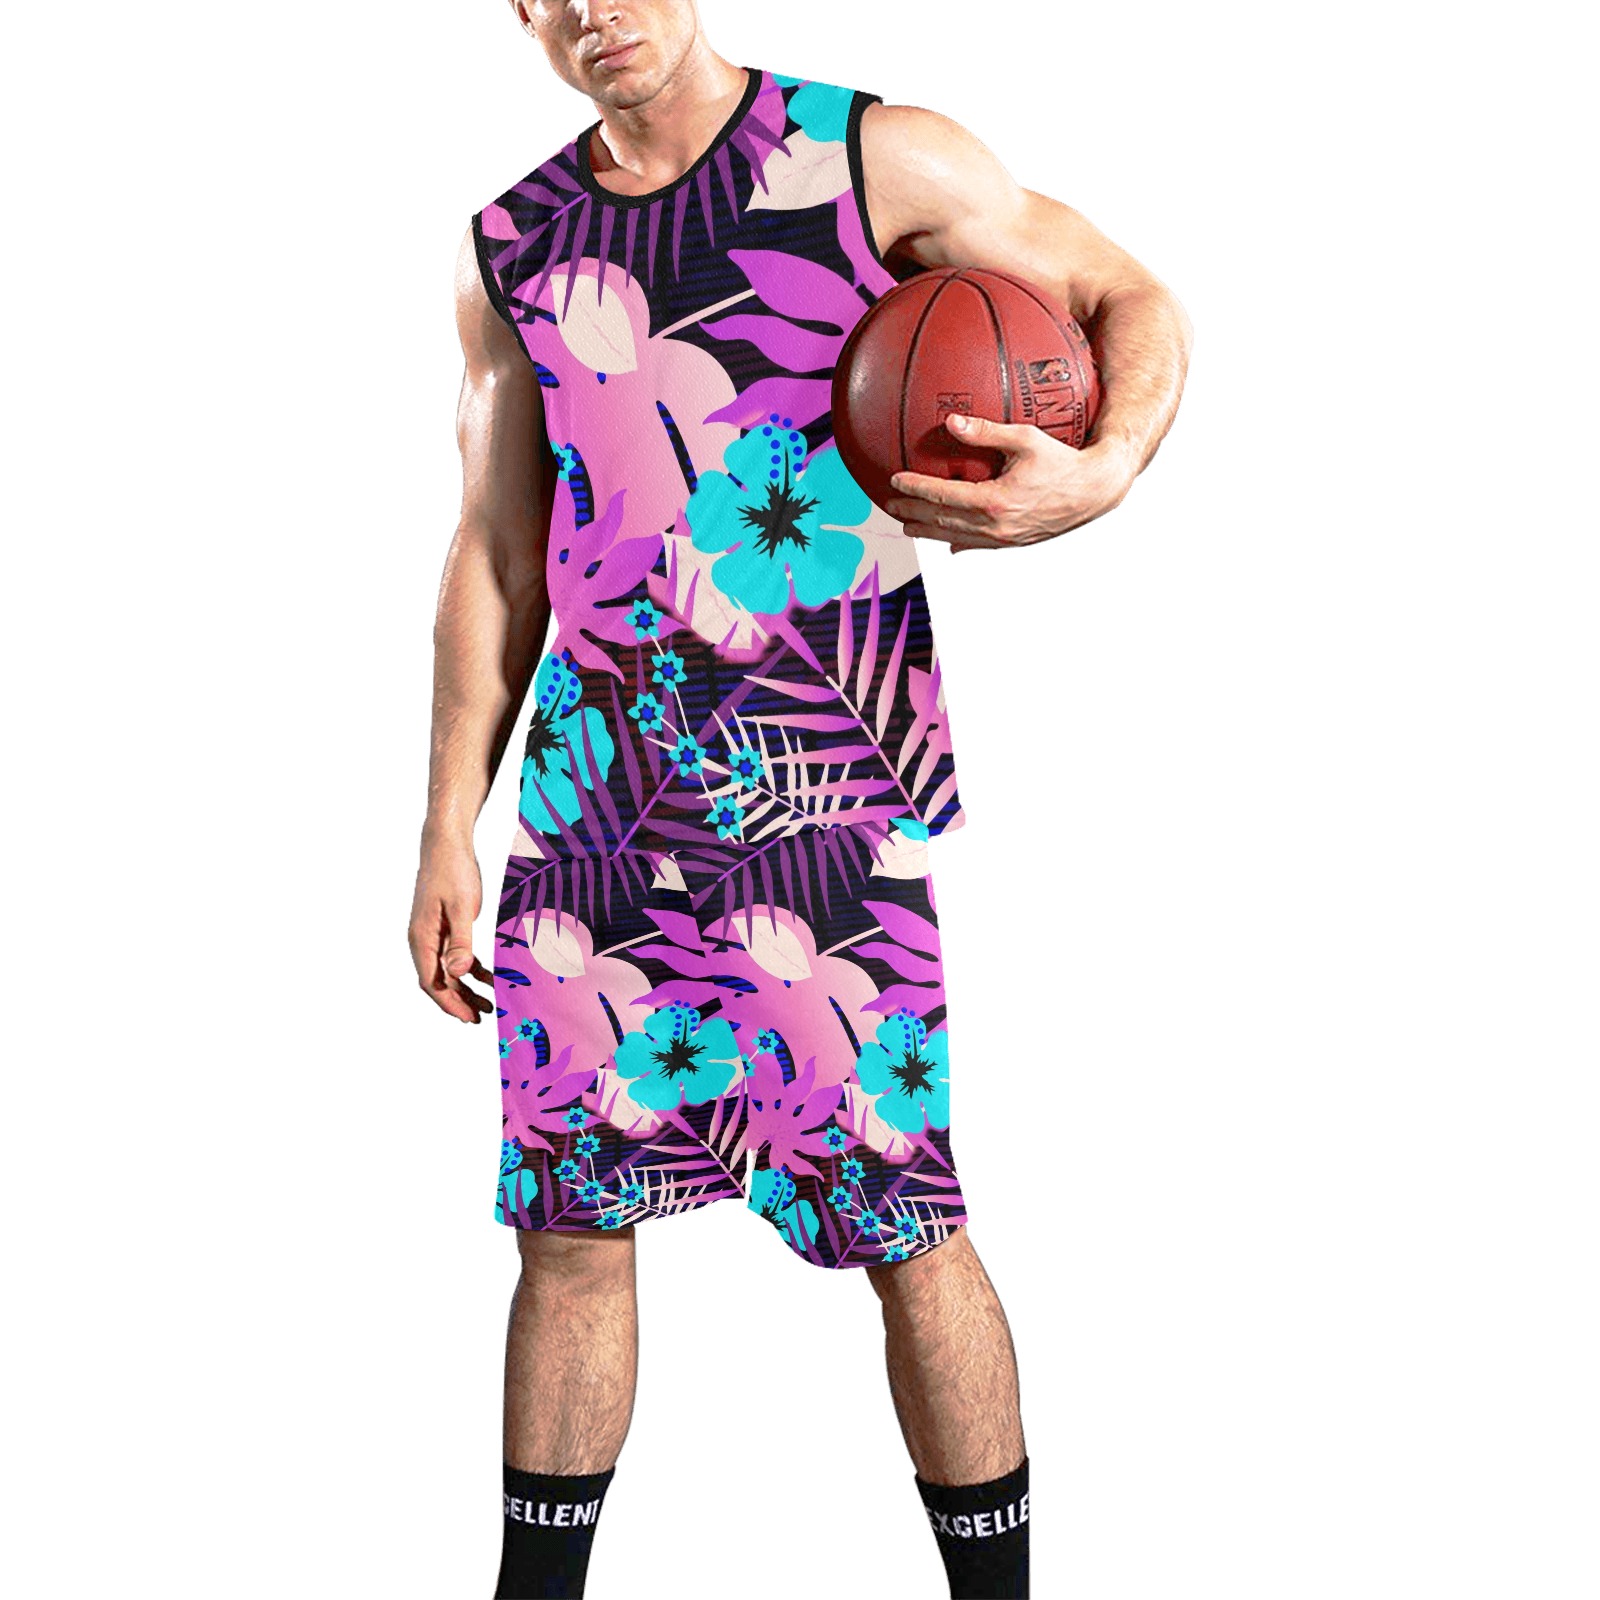 GROOVY FUNK THING FLORAL PURPLE All Over Print Basketball Uniform